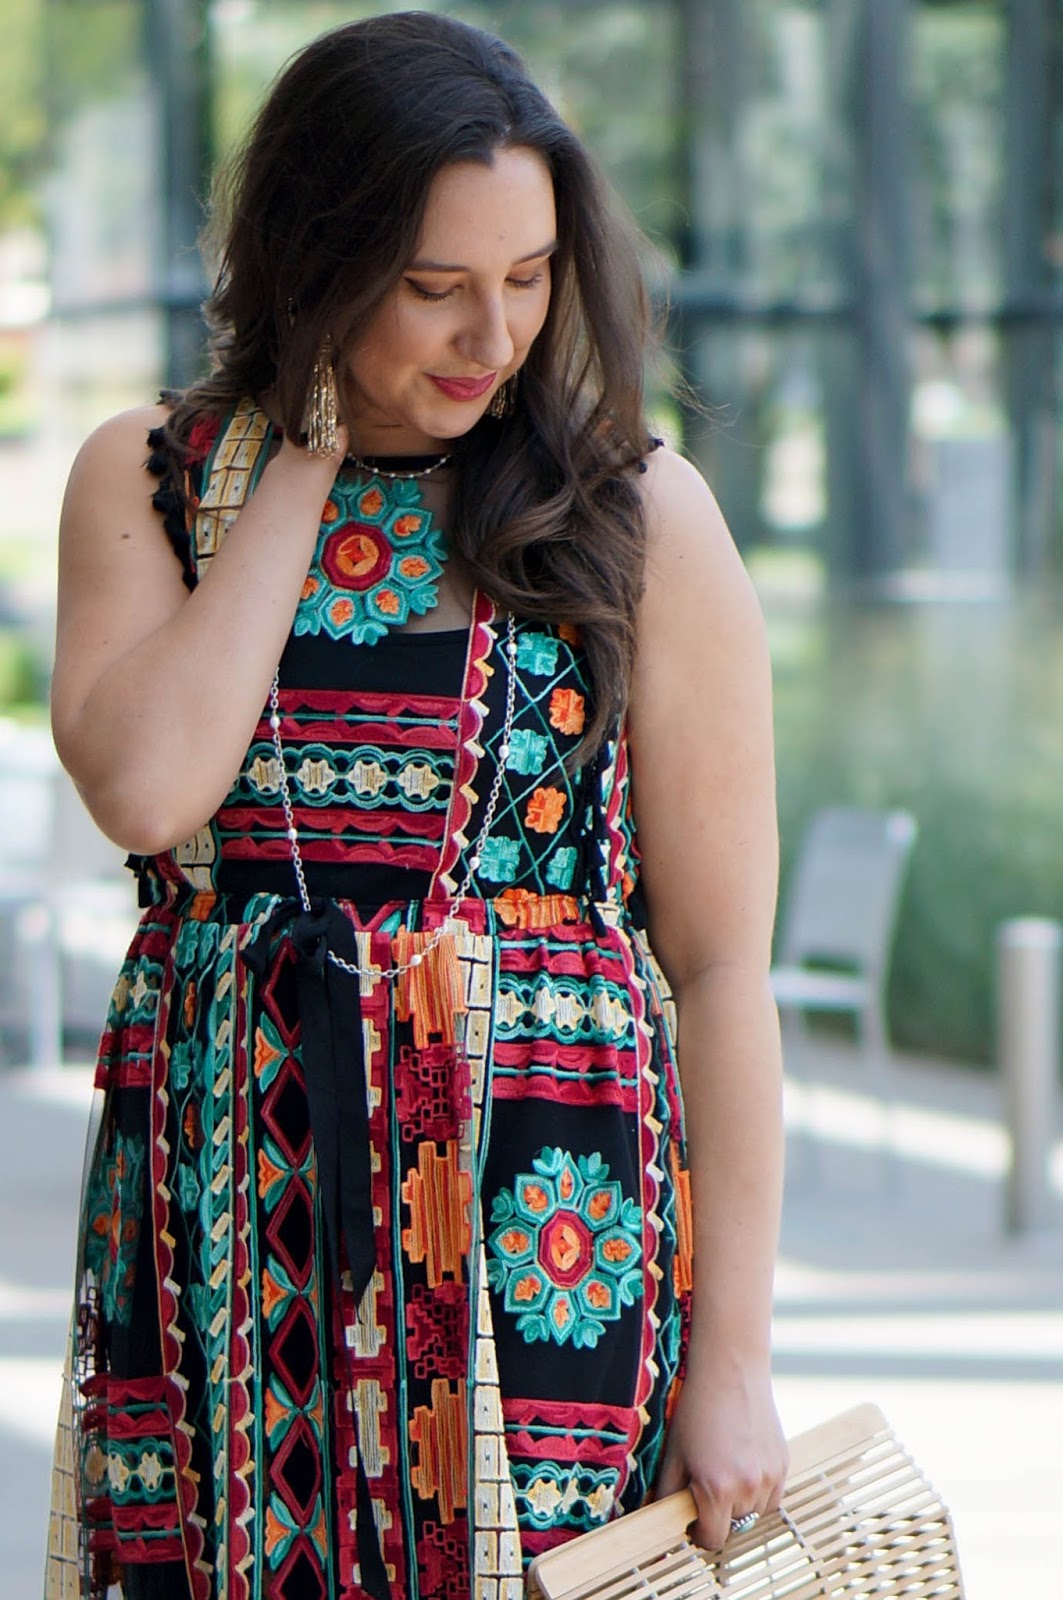 Amelia B. in the Big D.: A dress fit for a fiesta